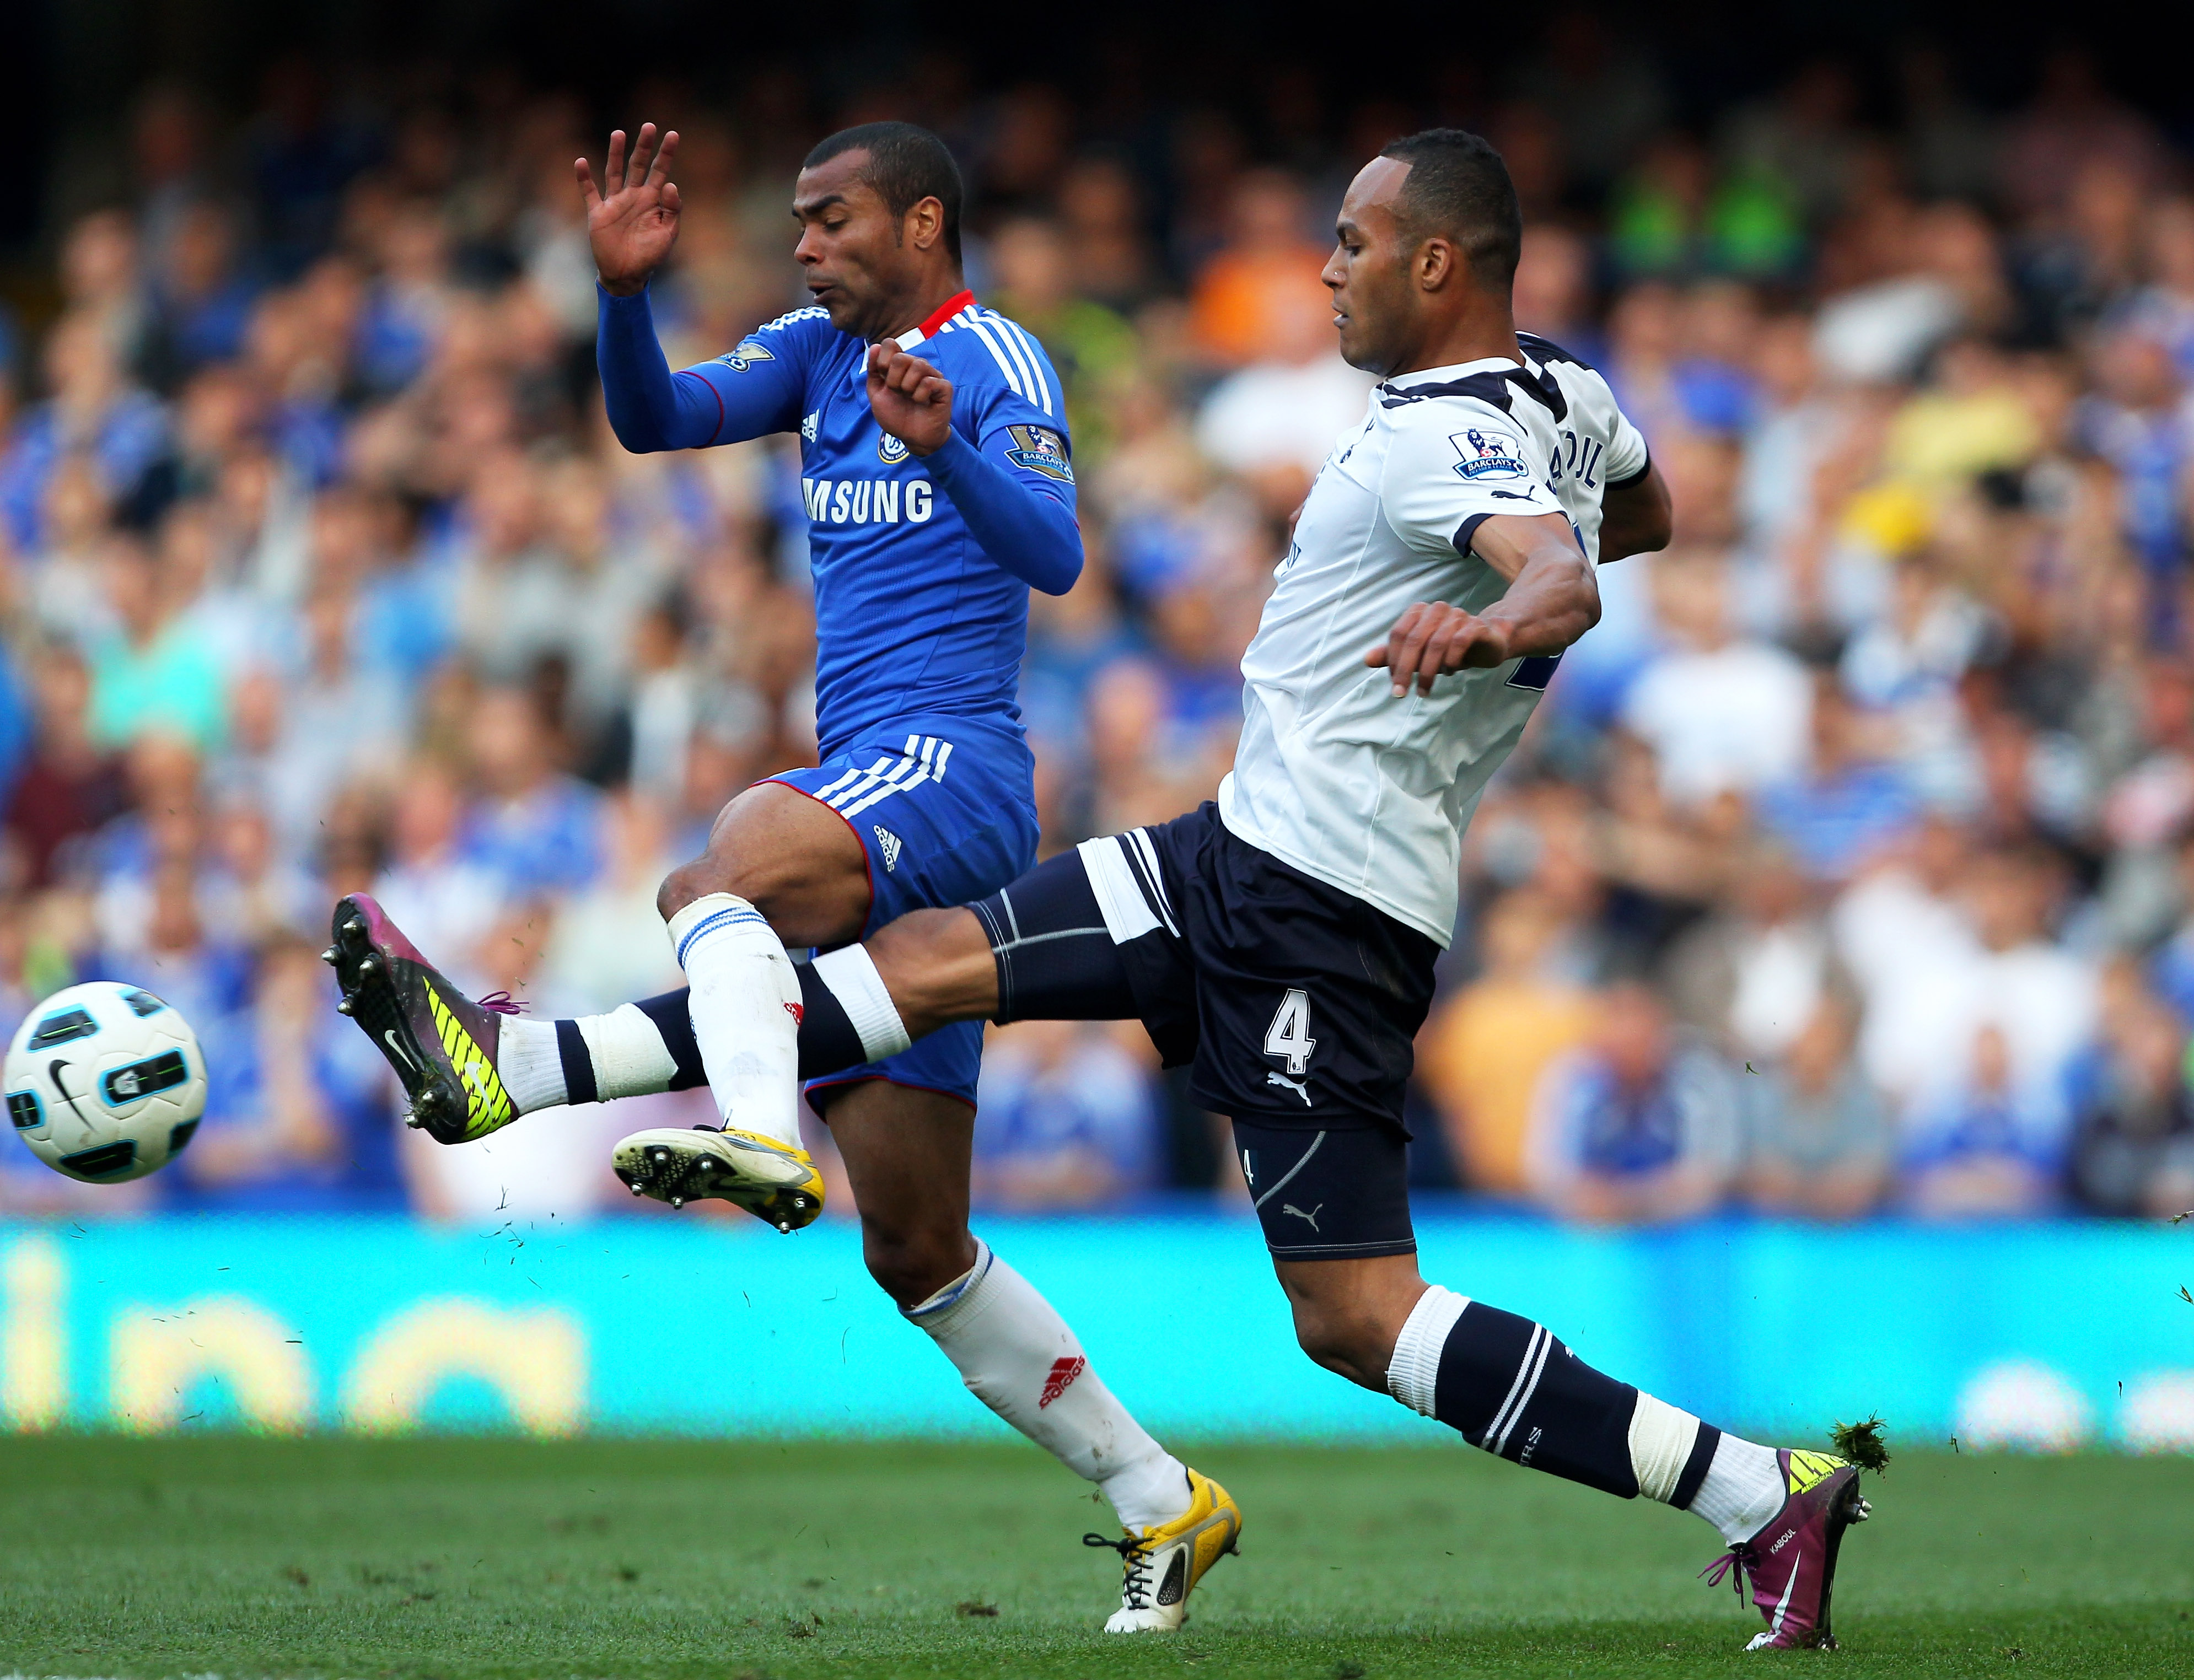 LONDON, ENGLAND - APRIL 30:  Ashley Cole of Chelsea and Younes Kaboul of Spurs compete for the ball during the Barclays Premier League match between Chelsea and Tottenham Hotspur at Stamford Bridge on April 30, 2011 in London, England.  (Photo by Clive Ro